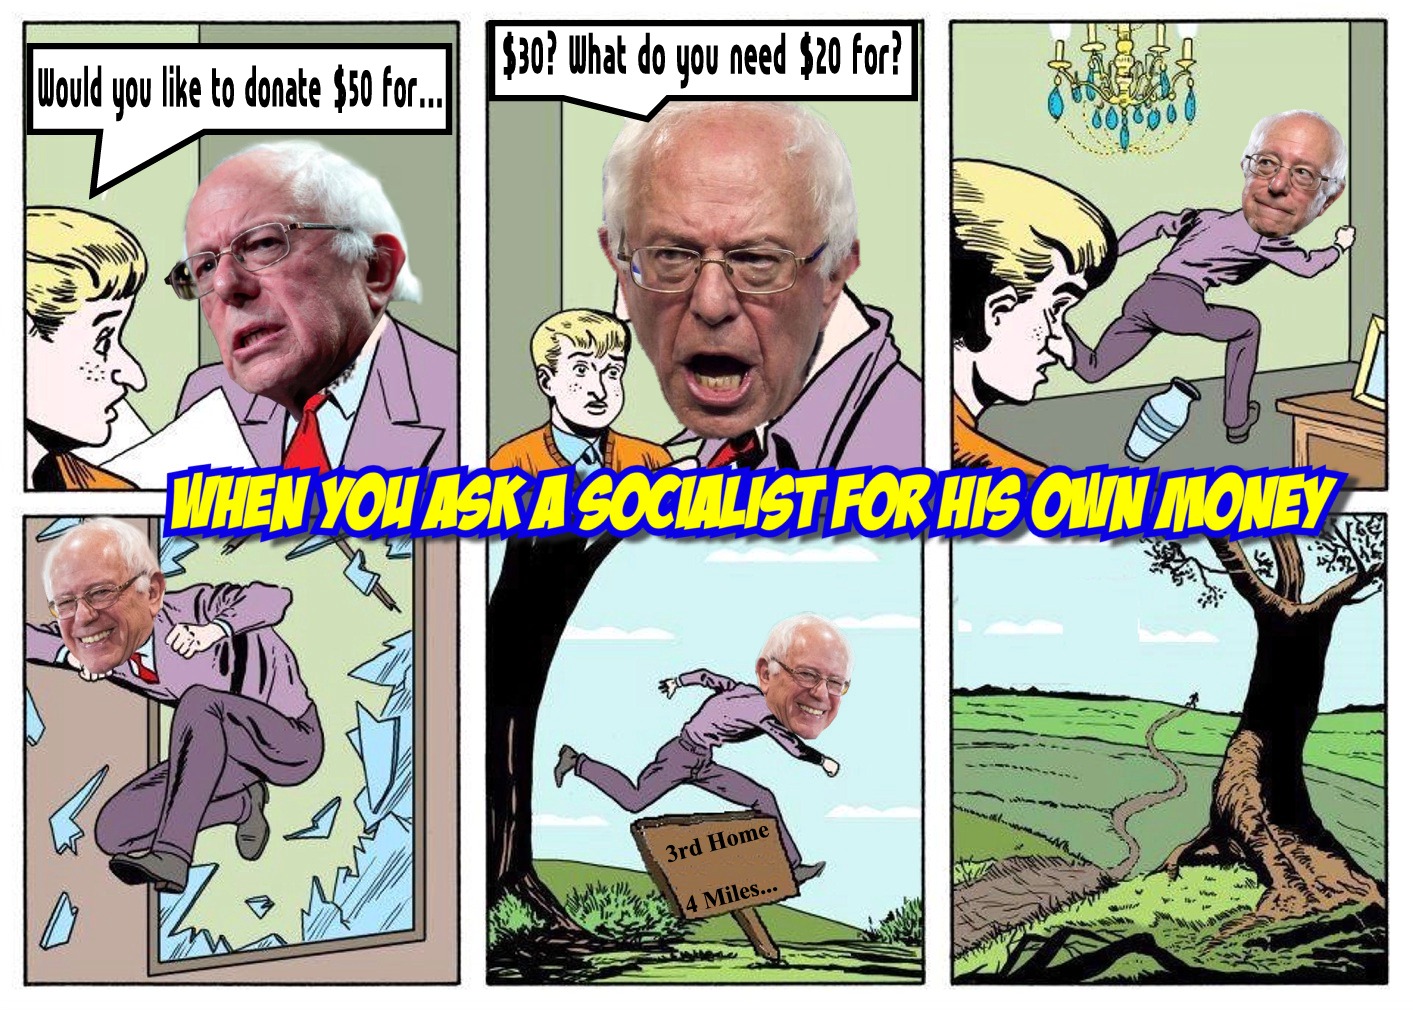 memes - dad can i borrow 50 dollars meme - $30? What do you need $20 for? Would you to donate $50 for... When You Iska Socialist For His Own Money 3rd Home 4 Miles...